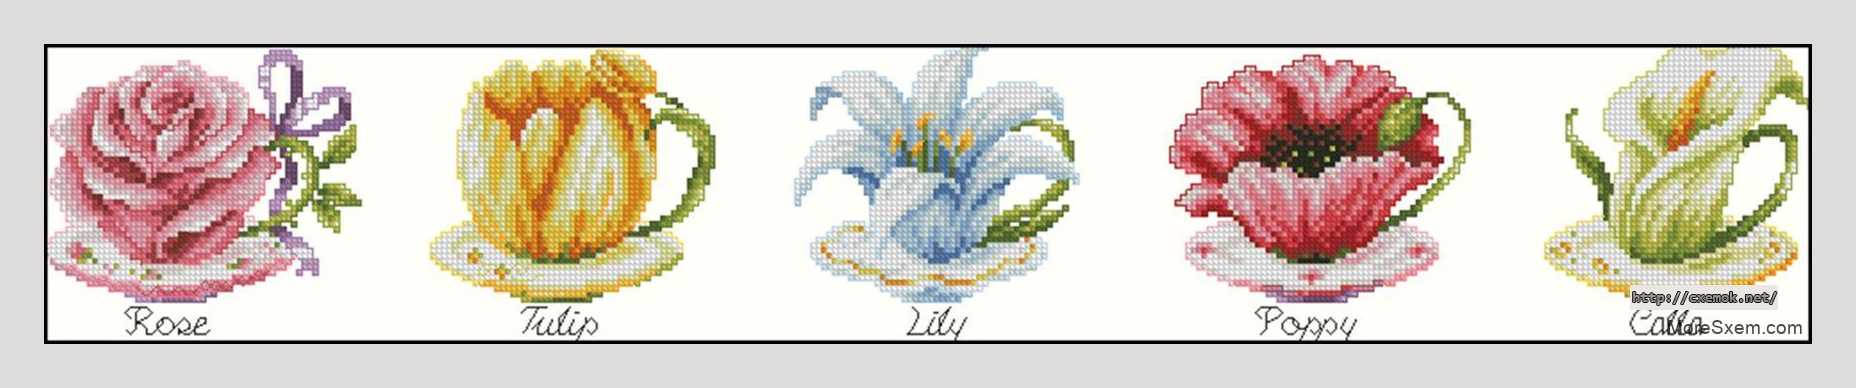 Download embroidery patterns by cross-stitch  - Чайные цветочки